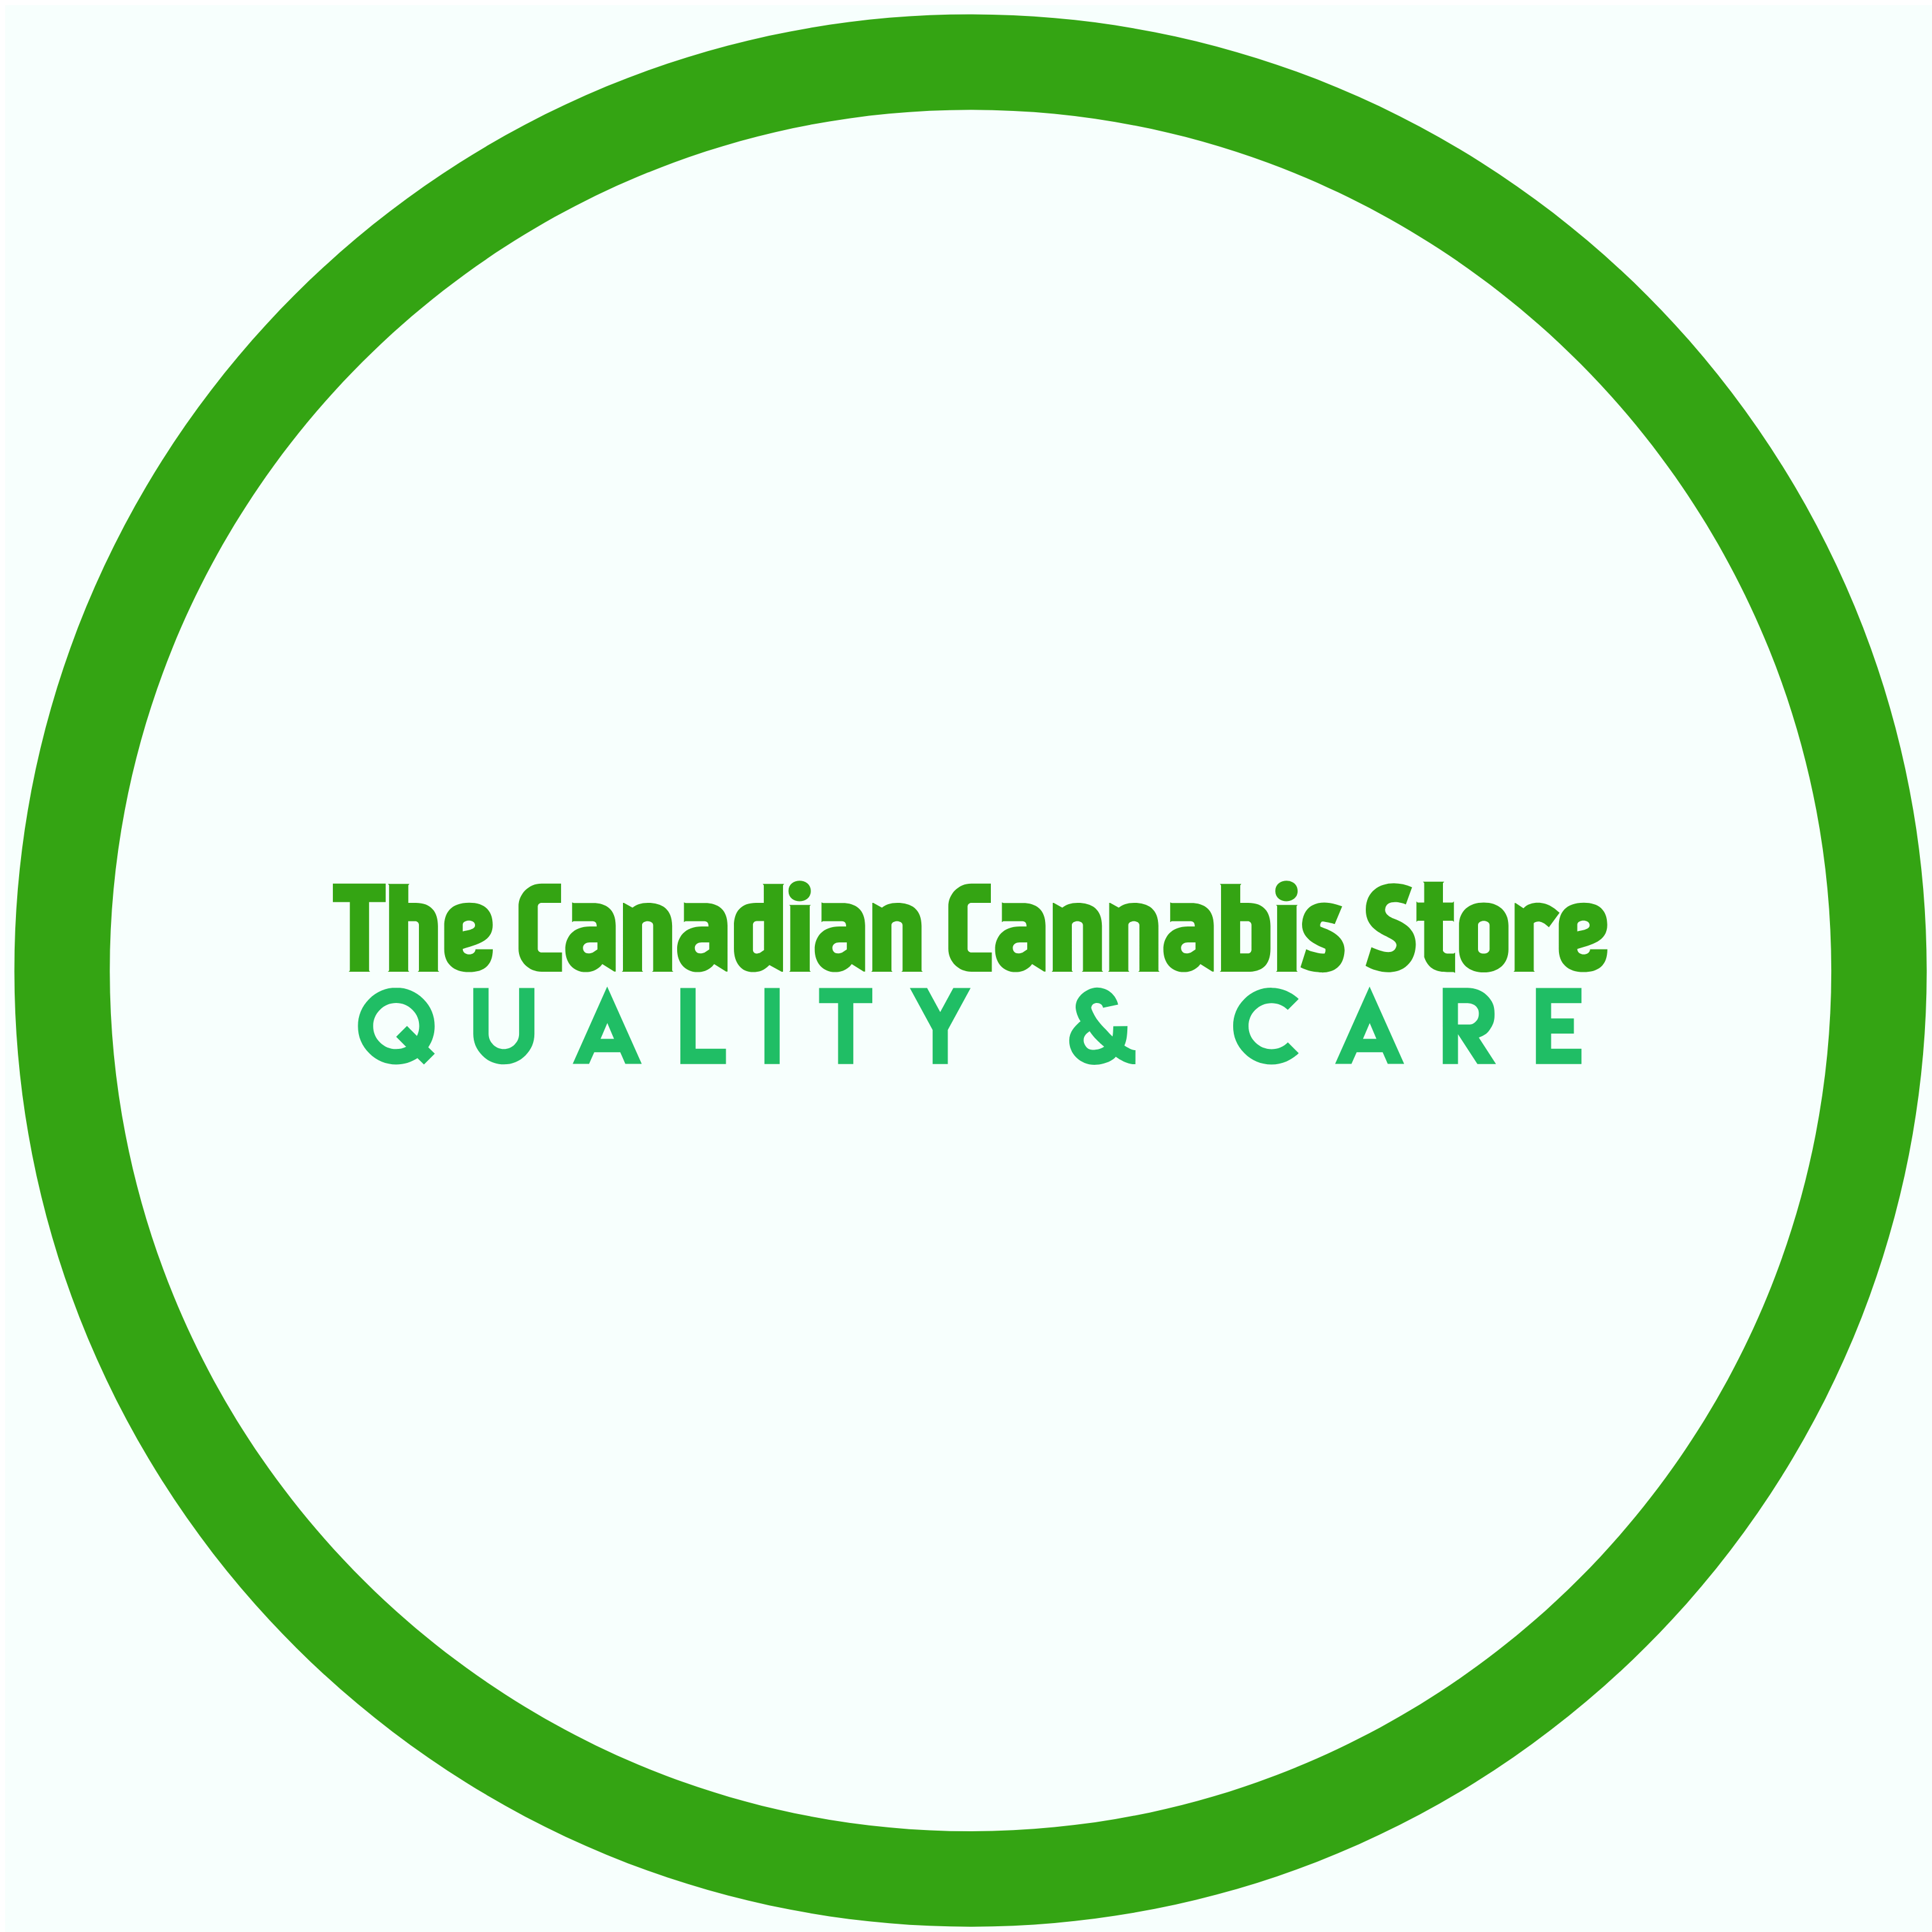 The Canadian Cannabis Store logo